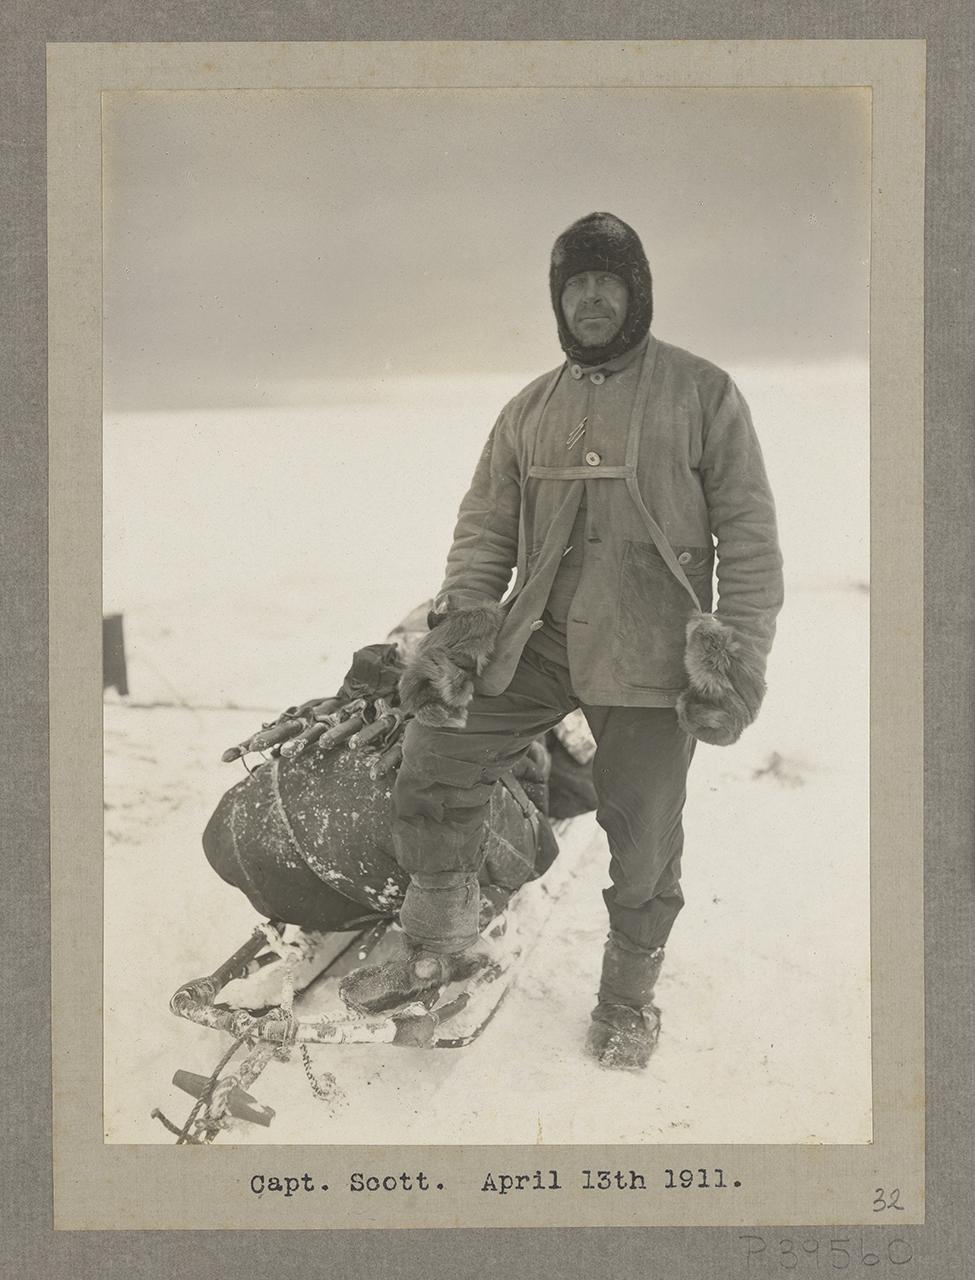 A full-length photograph of Captain R. F. Scott in full polar clothing standing next to the Nansen-designed sledge. His right foot is resting on the sledge frame with his right hand on his knee. The sledge is fully loaded with equipment and the tent poles can be seen lashed to the top. Scott is wearing a canvas over-jacket with the canvas webbing attached to large fur gloves, a knitted balaclava, and over-trousers tied with putties over finnesko fur boots. The photograph was taken on the day that Scott retu